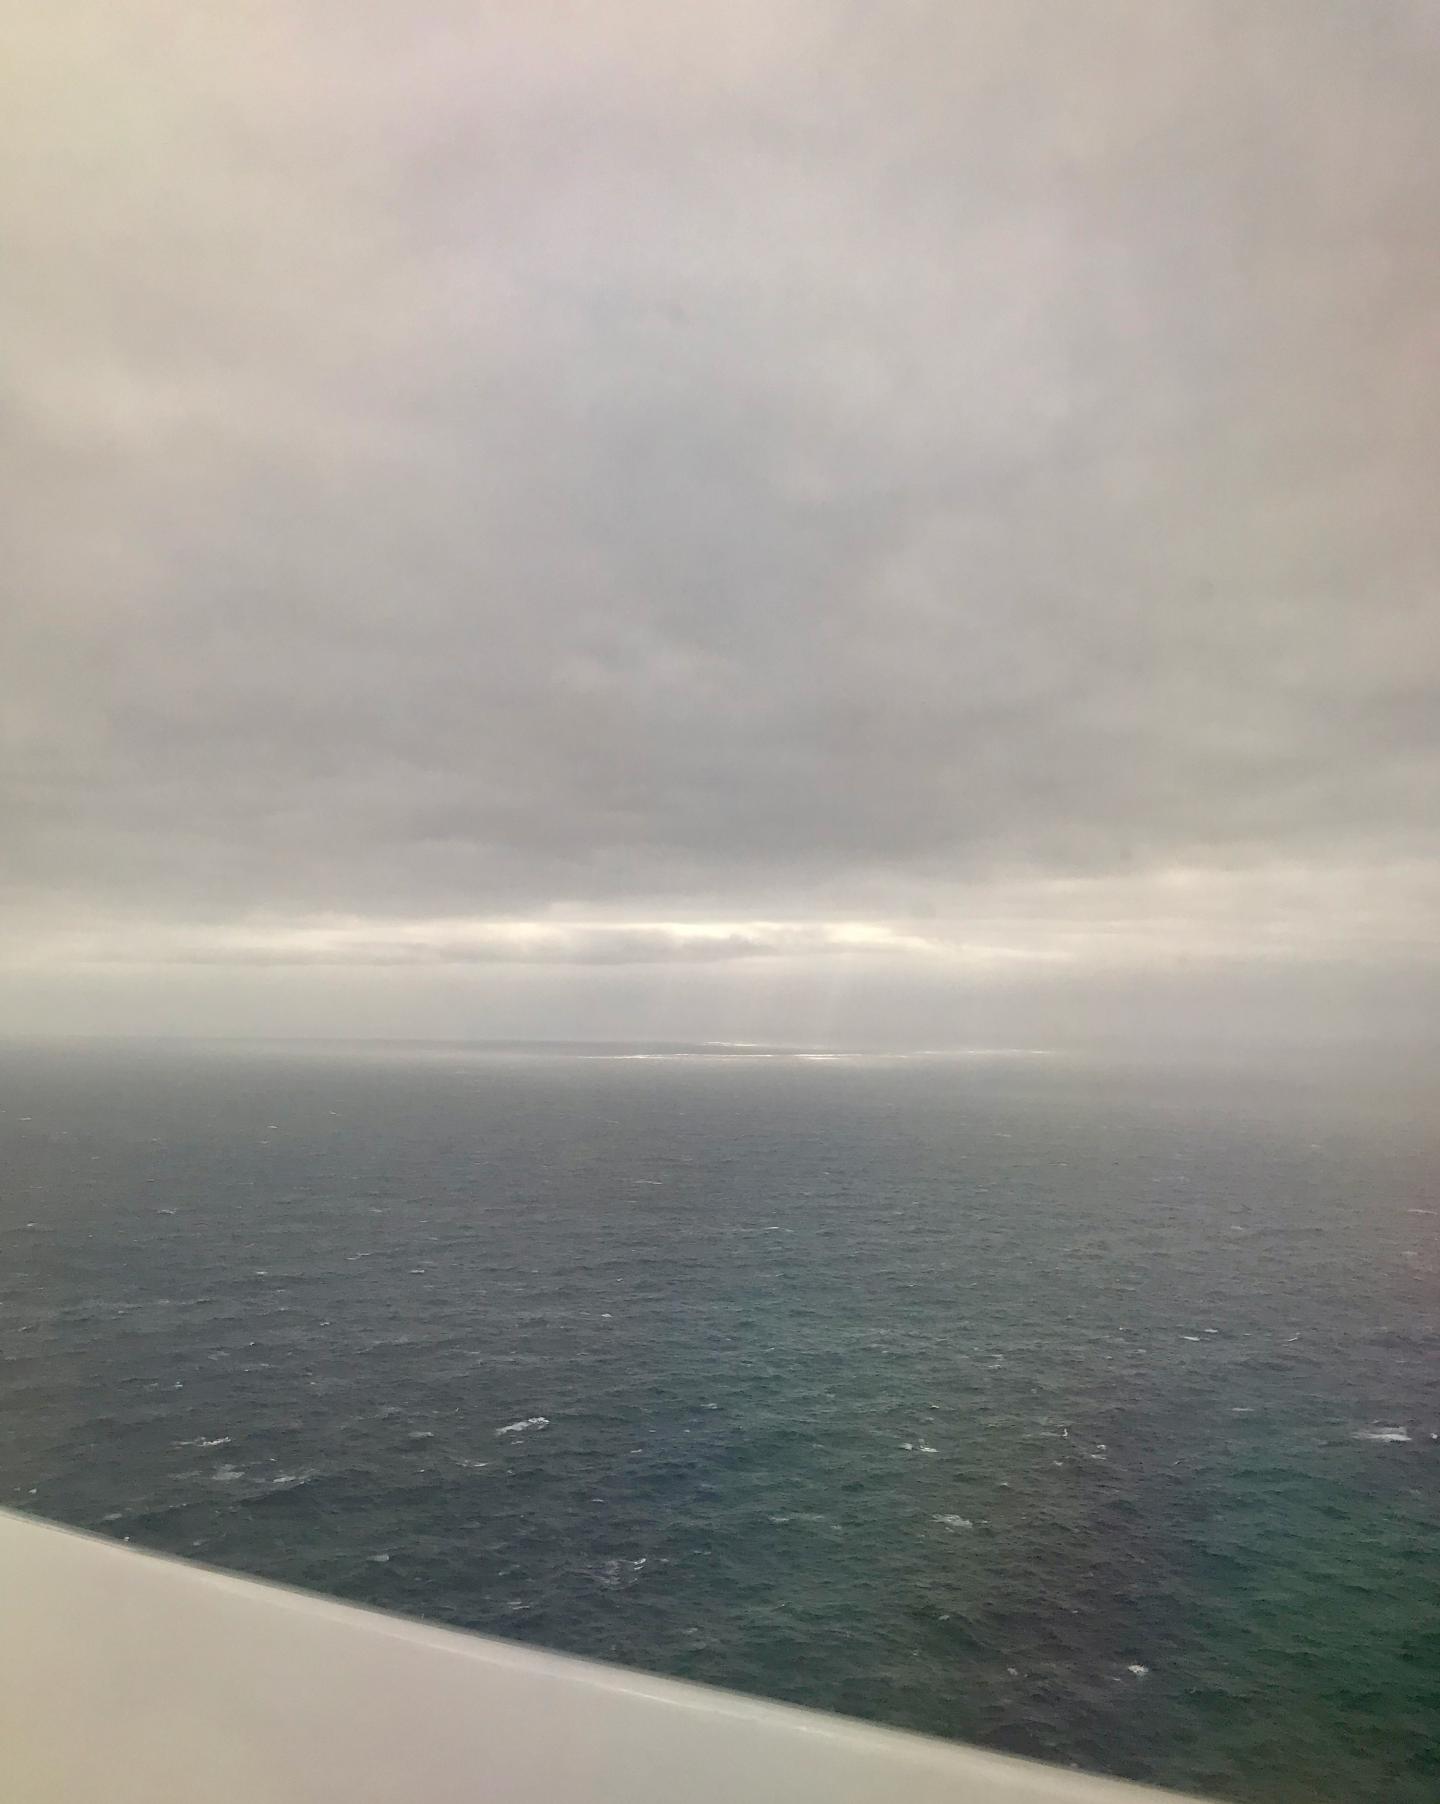 Clouds over the Southern Ocean due south of Tasmania, Australia.